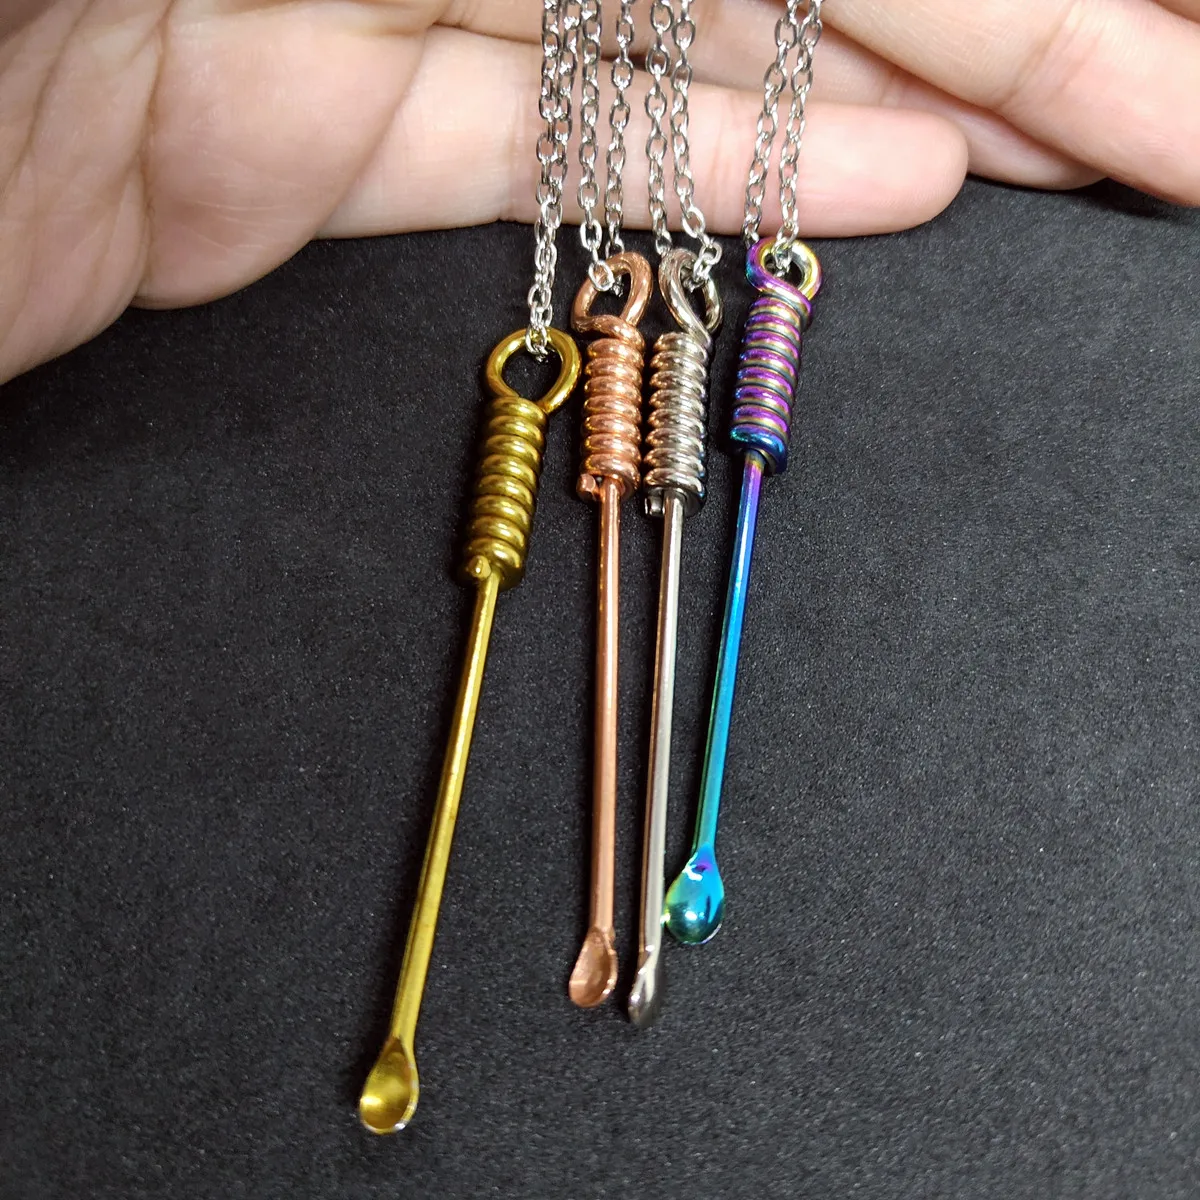 Fashion metal necklace 4 Colors Mini spoon Small tool pendant necklace Jewelry stainless steel Creative Handmade Necklace